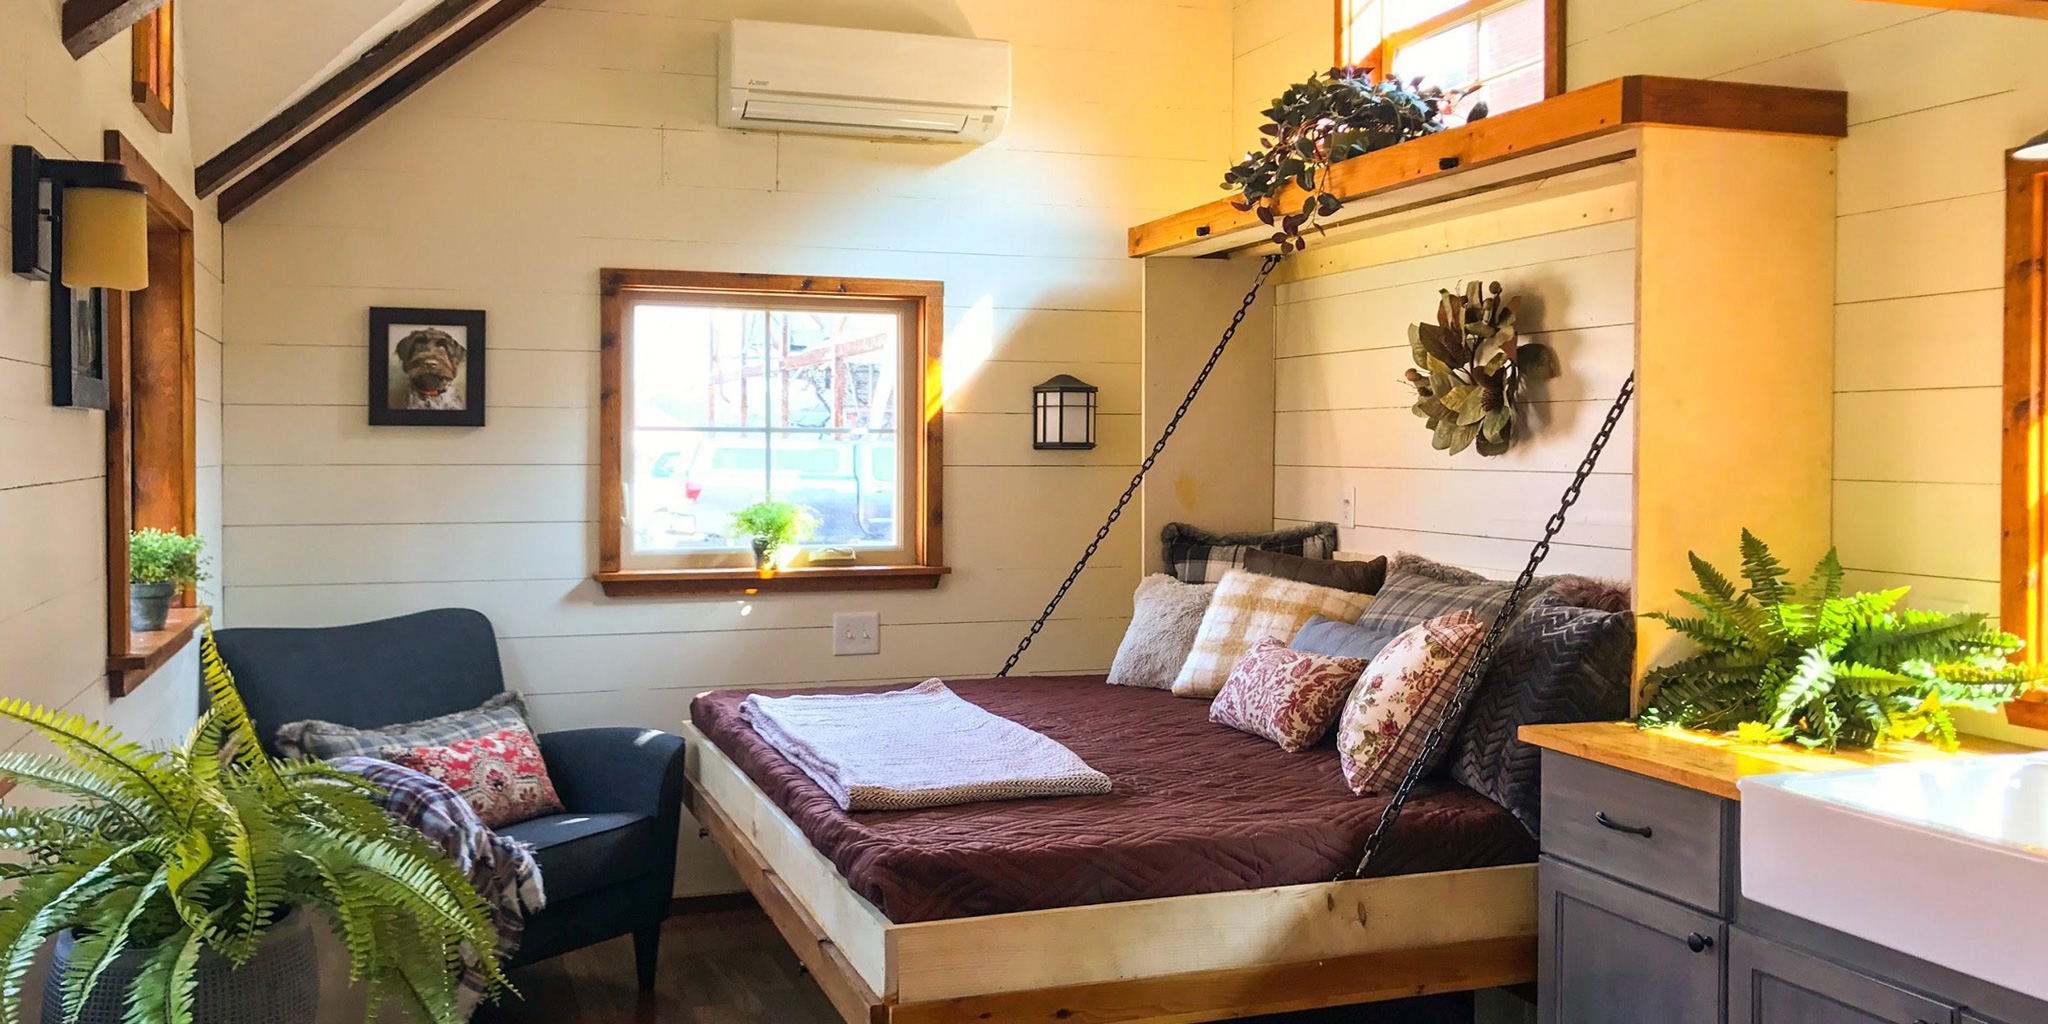 The Exhaustive Guide to Heating and Cooling Your Tiny Home - PTAC